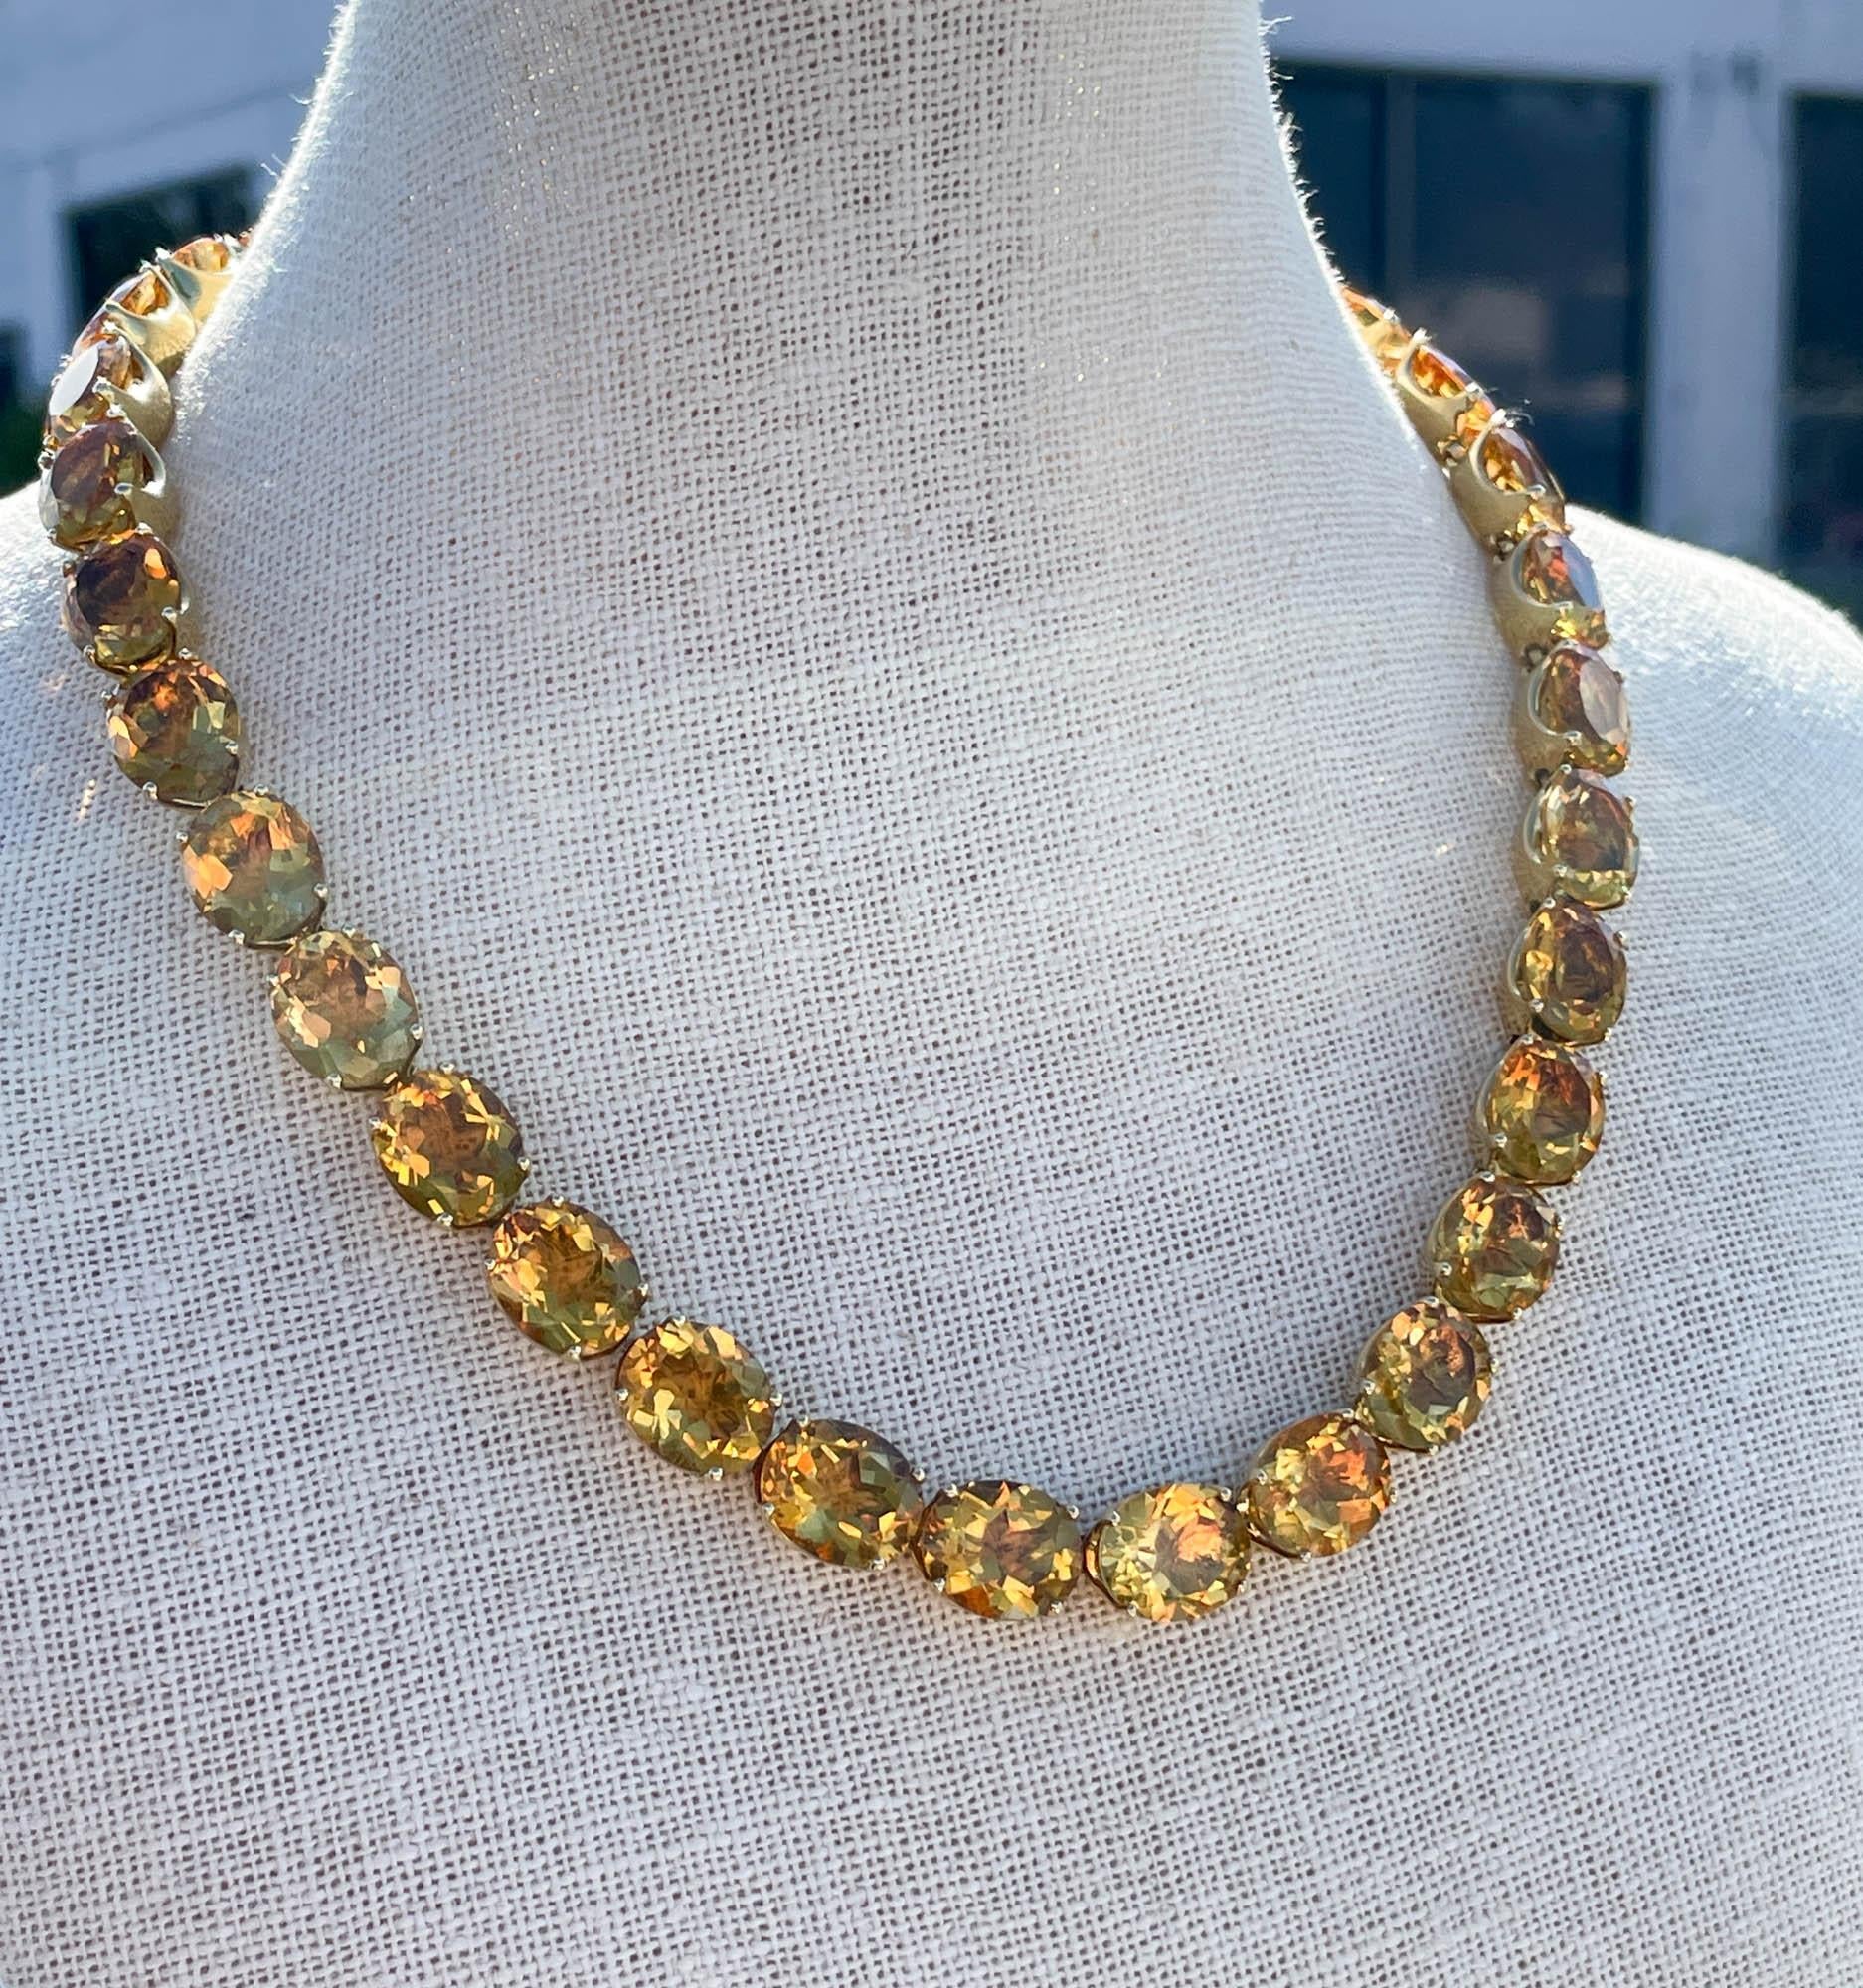 Jay Feder Vintage 137.7ct Oval Citrine 18k Yellow Gold Tennis Necklace In Good Condition For Sale In Boca Raton, FL